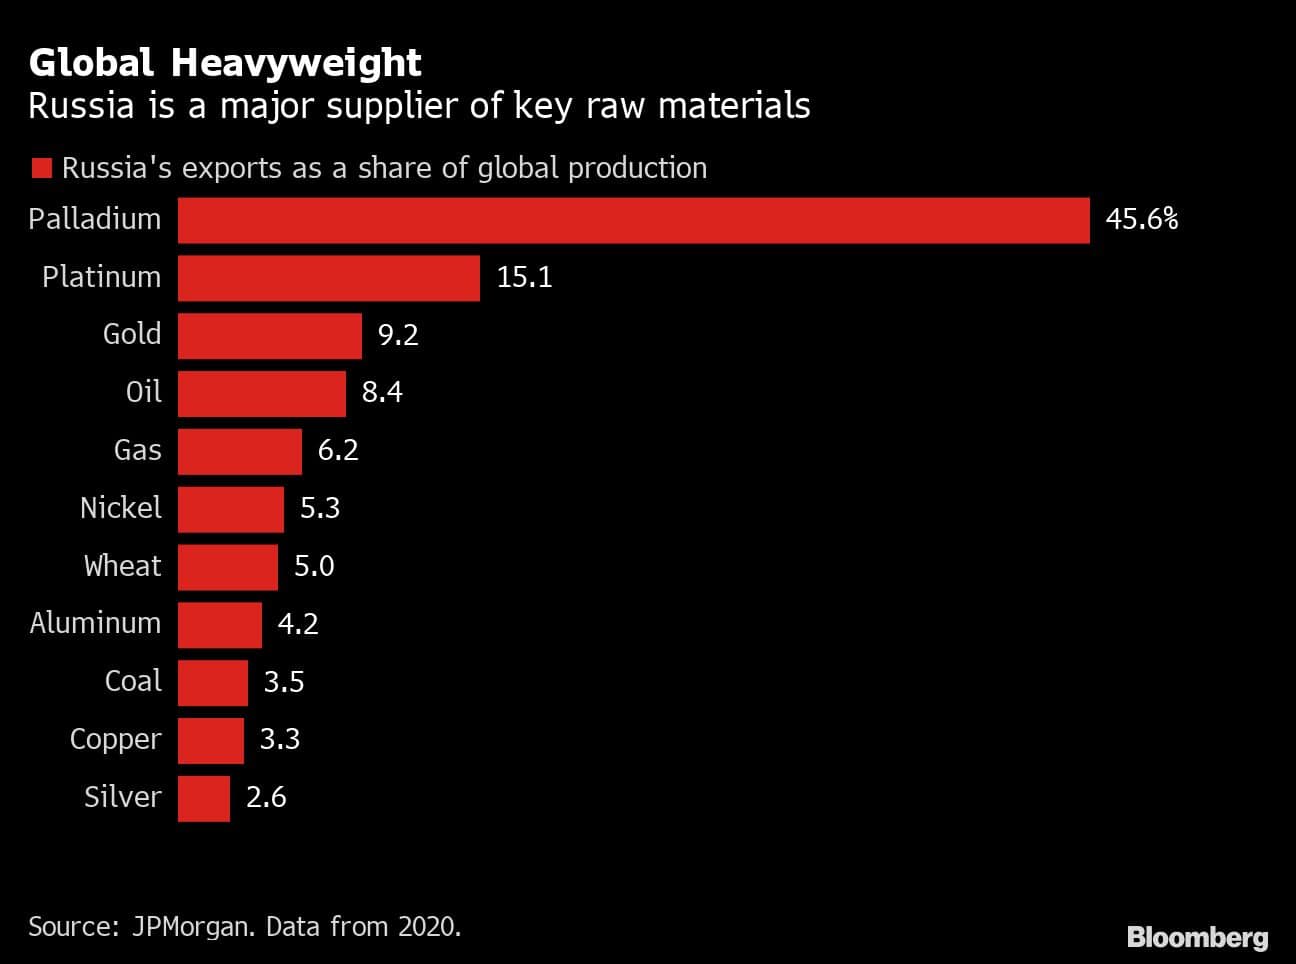 Global Heavyweight | Russia is a major supplier of key raw materials